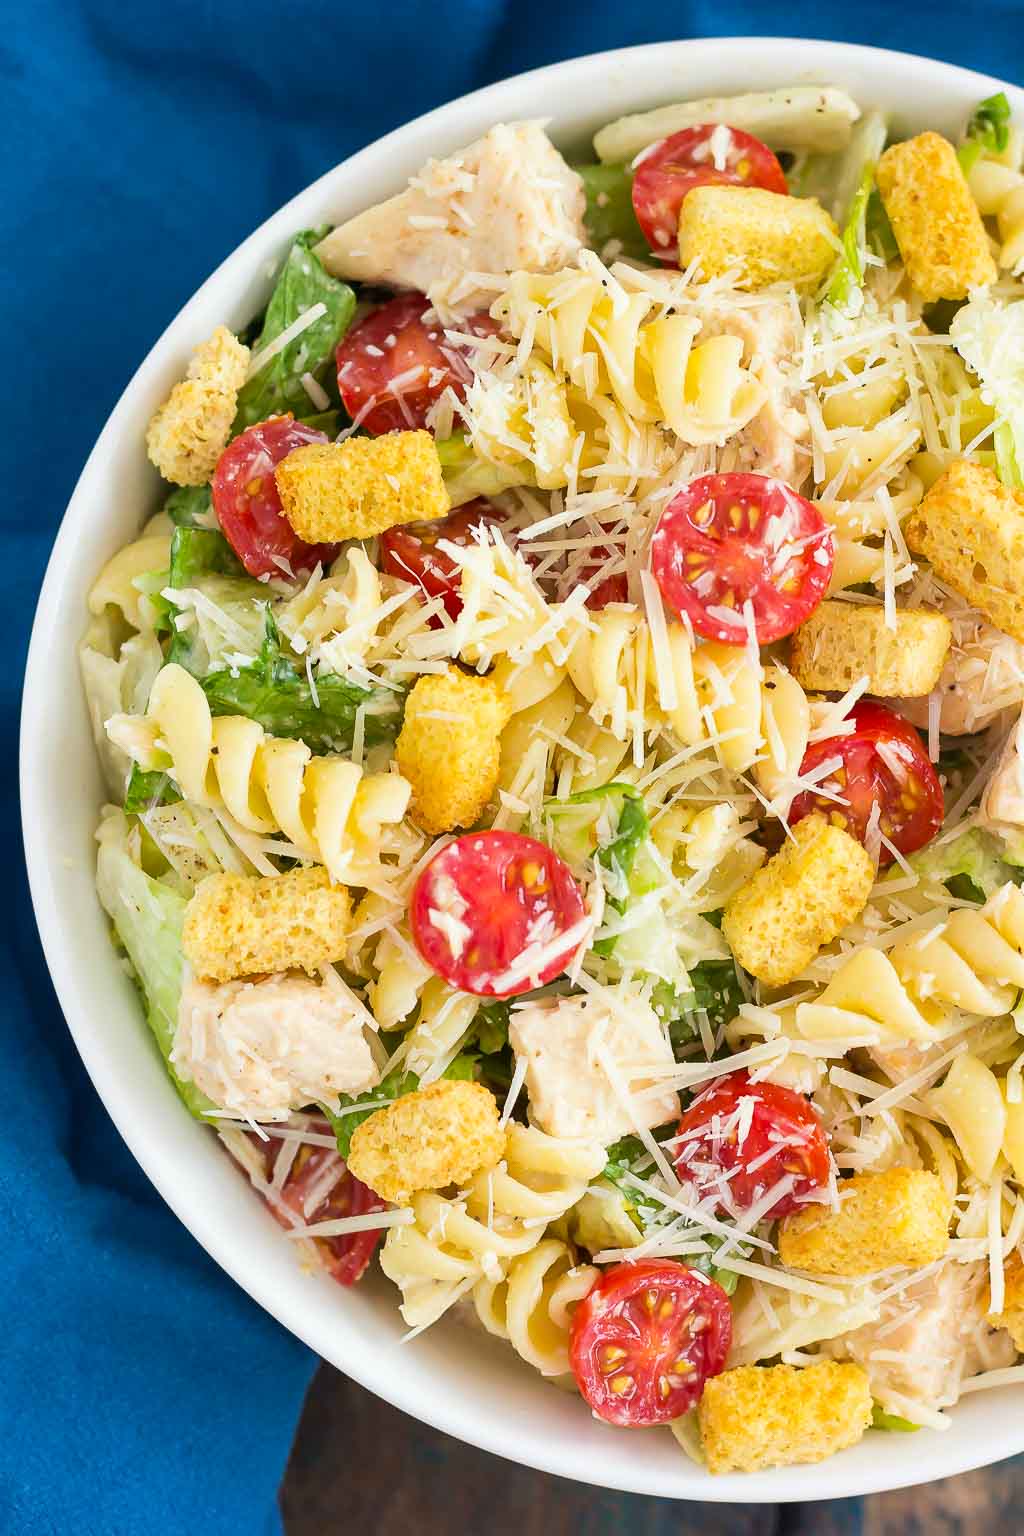 This Chicken Caesar Pasta Salad is a simple dish that's ready in less than 30 minutes. Romaine lettuce, fresh pasta, chicken, and Parmesan cheese are tossed in a creamy caesar dressing that's full of flavor. Light, yet filling, this easy dish makes a delicious weeknight meal!